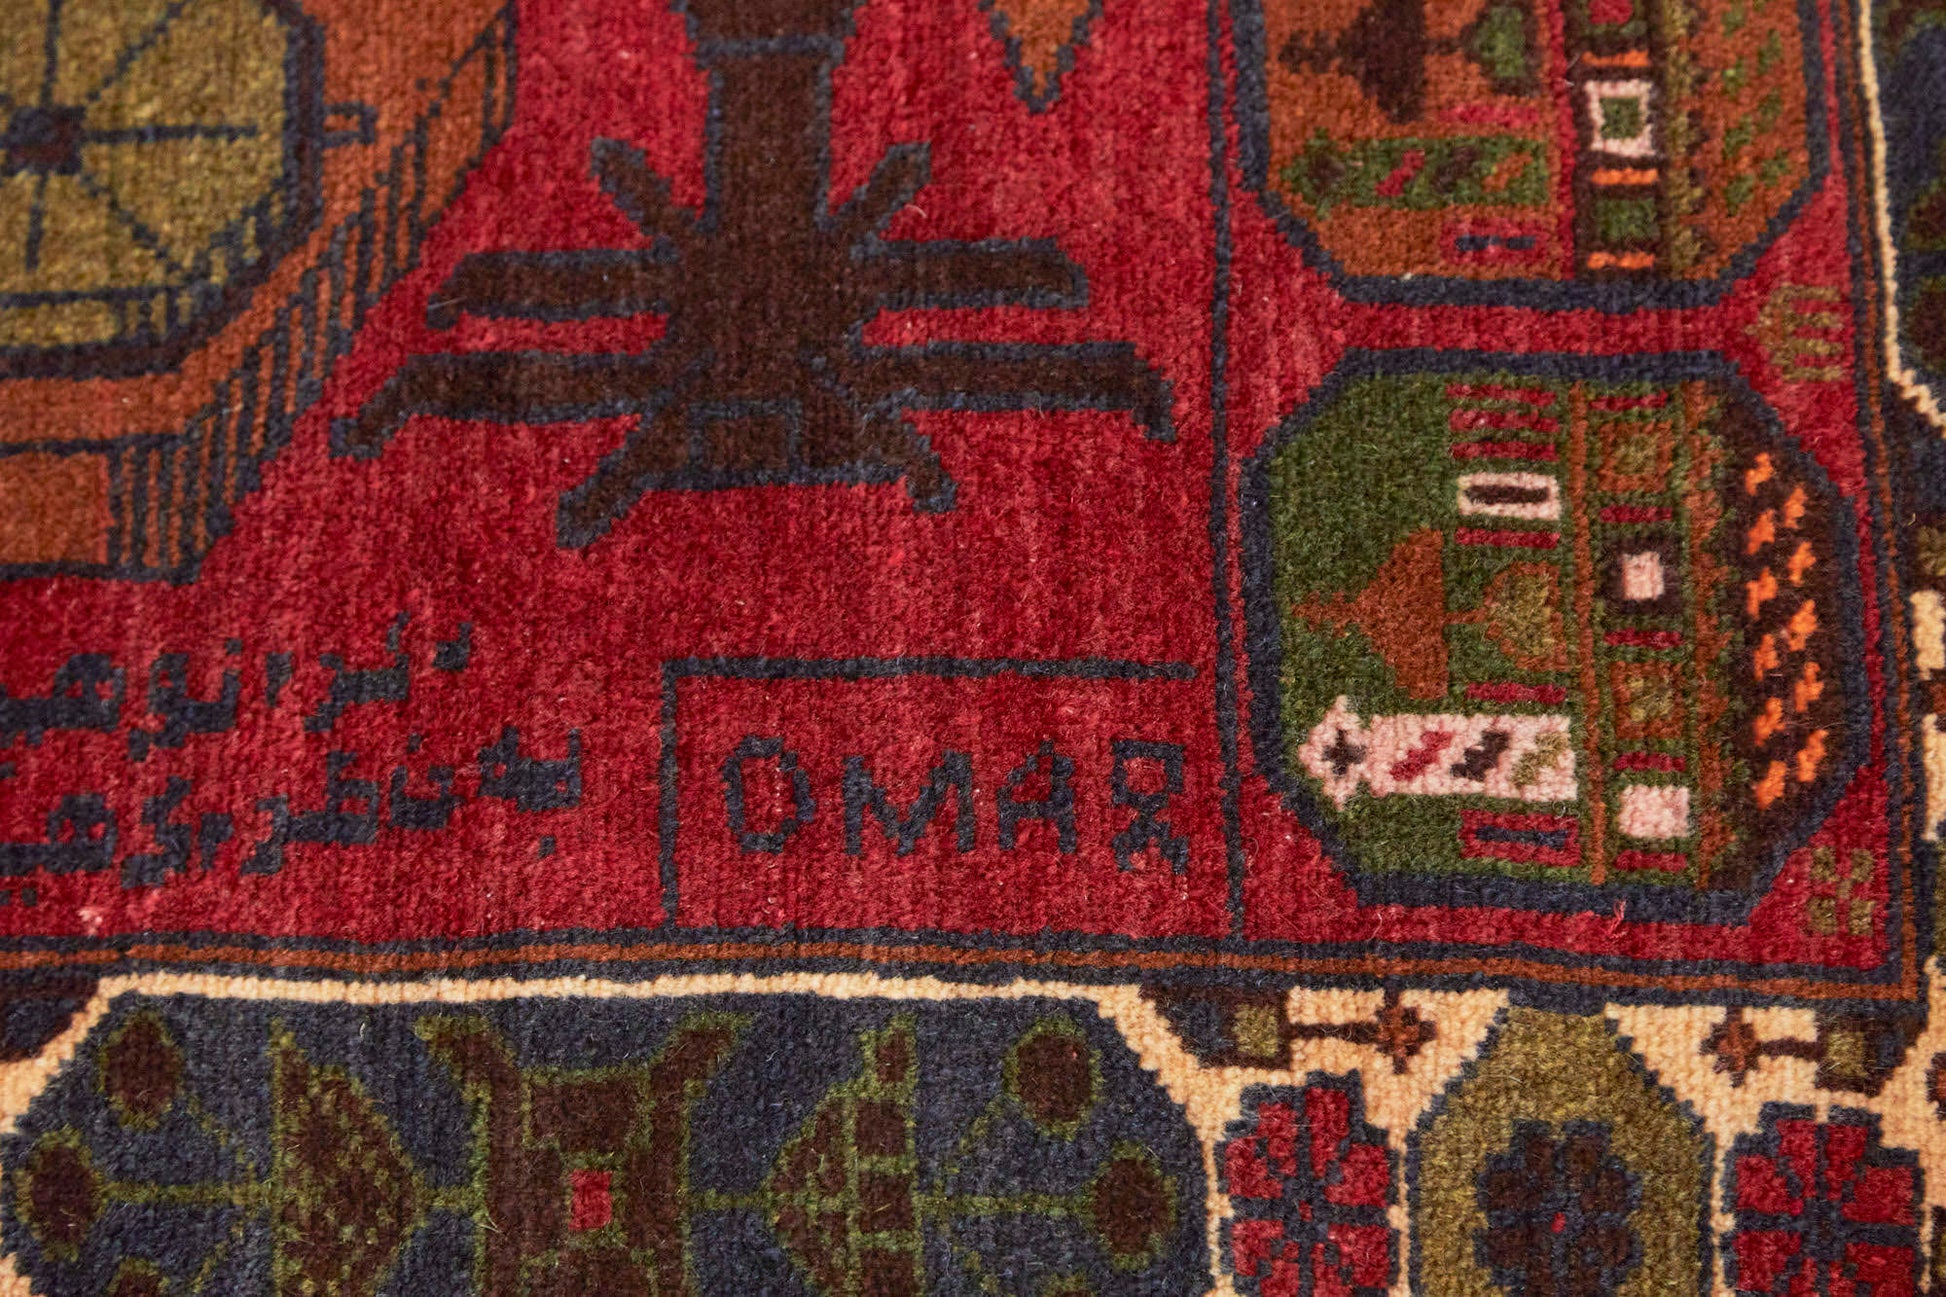 Detail of corner with text "Omar" on Afghan hand woven "Unexploded Ordinance" rug, with deep red base, and green, yellow, tan and cream images depicting weapons, buildings and flowers - Available from King Kennedy Rugs Los Angeles